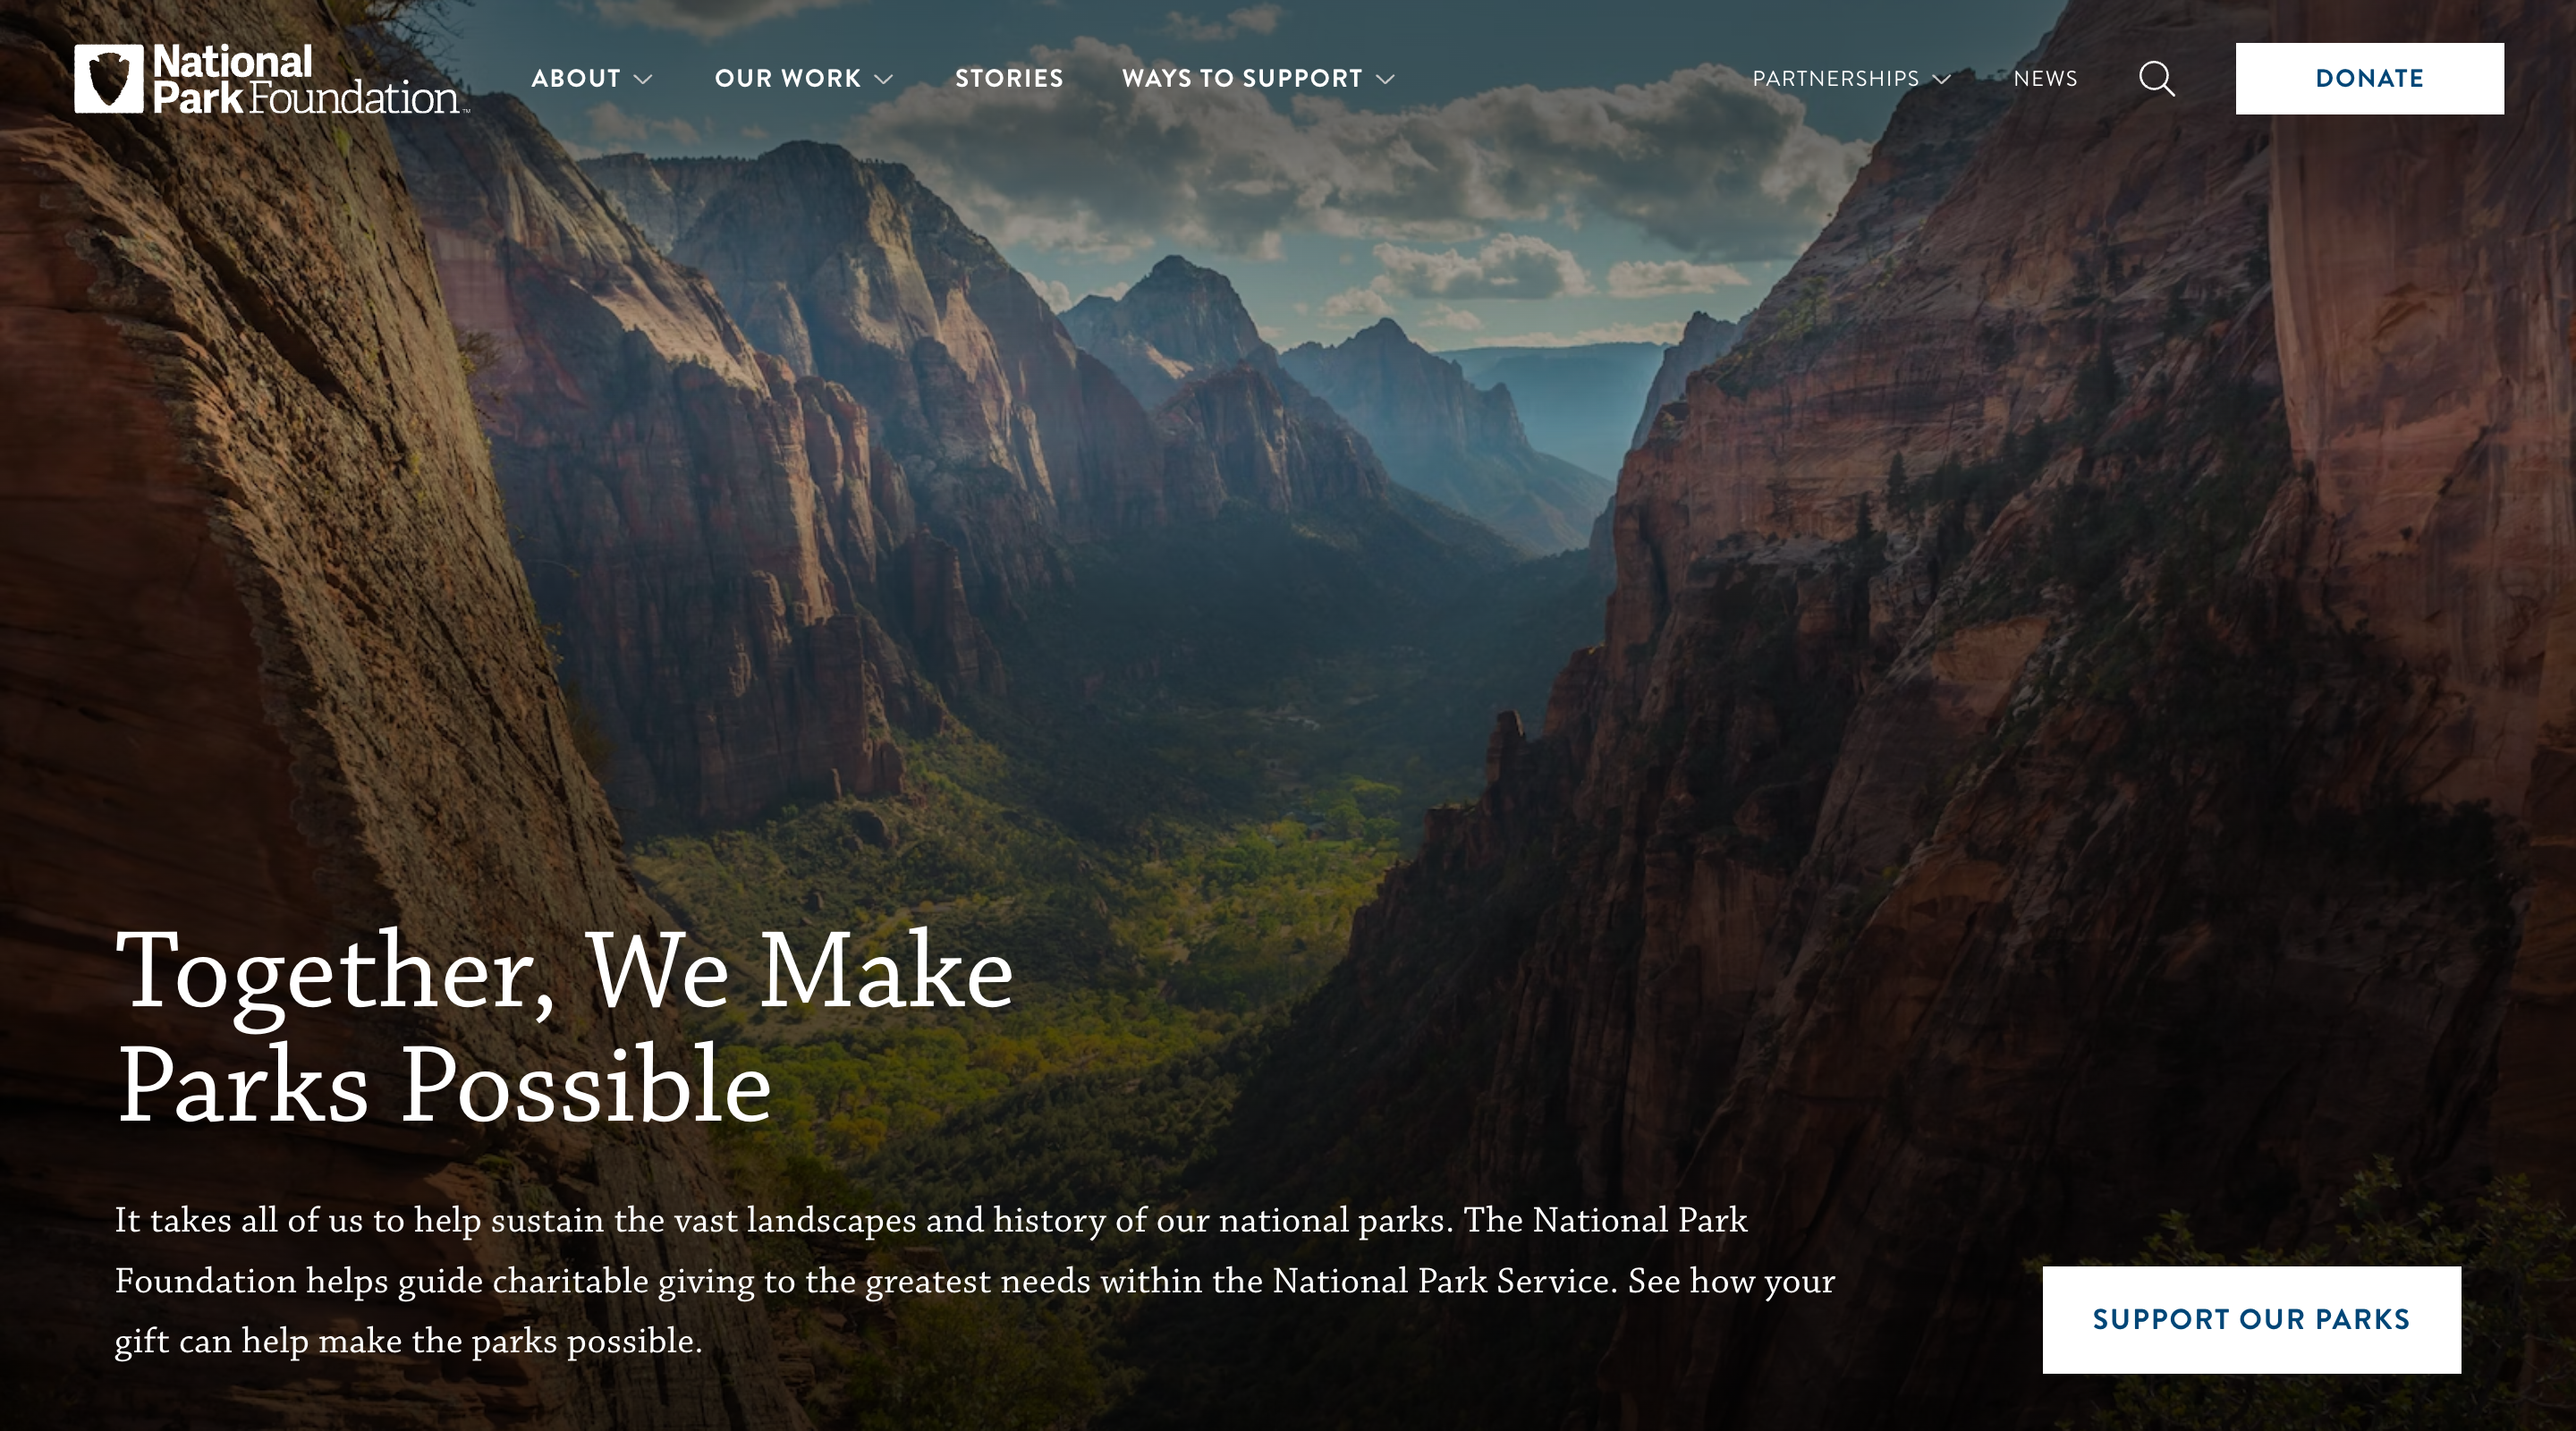 Screenshot of the National Park Foundation home page. The header contains the National Park Foundation logo, the site navigation, a search button, and a large 'Donate' button. The hero section provides an introduction to the site and has a large 'Support our parks' call-to-action button. There is a background image of mountains across the whole screen.